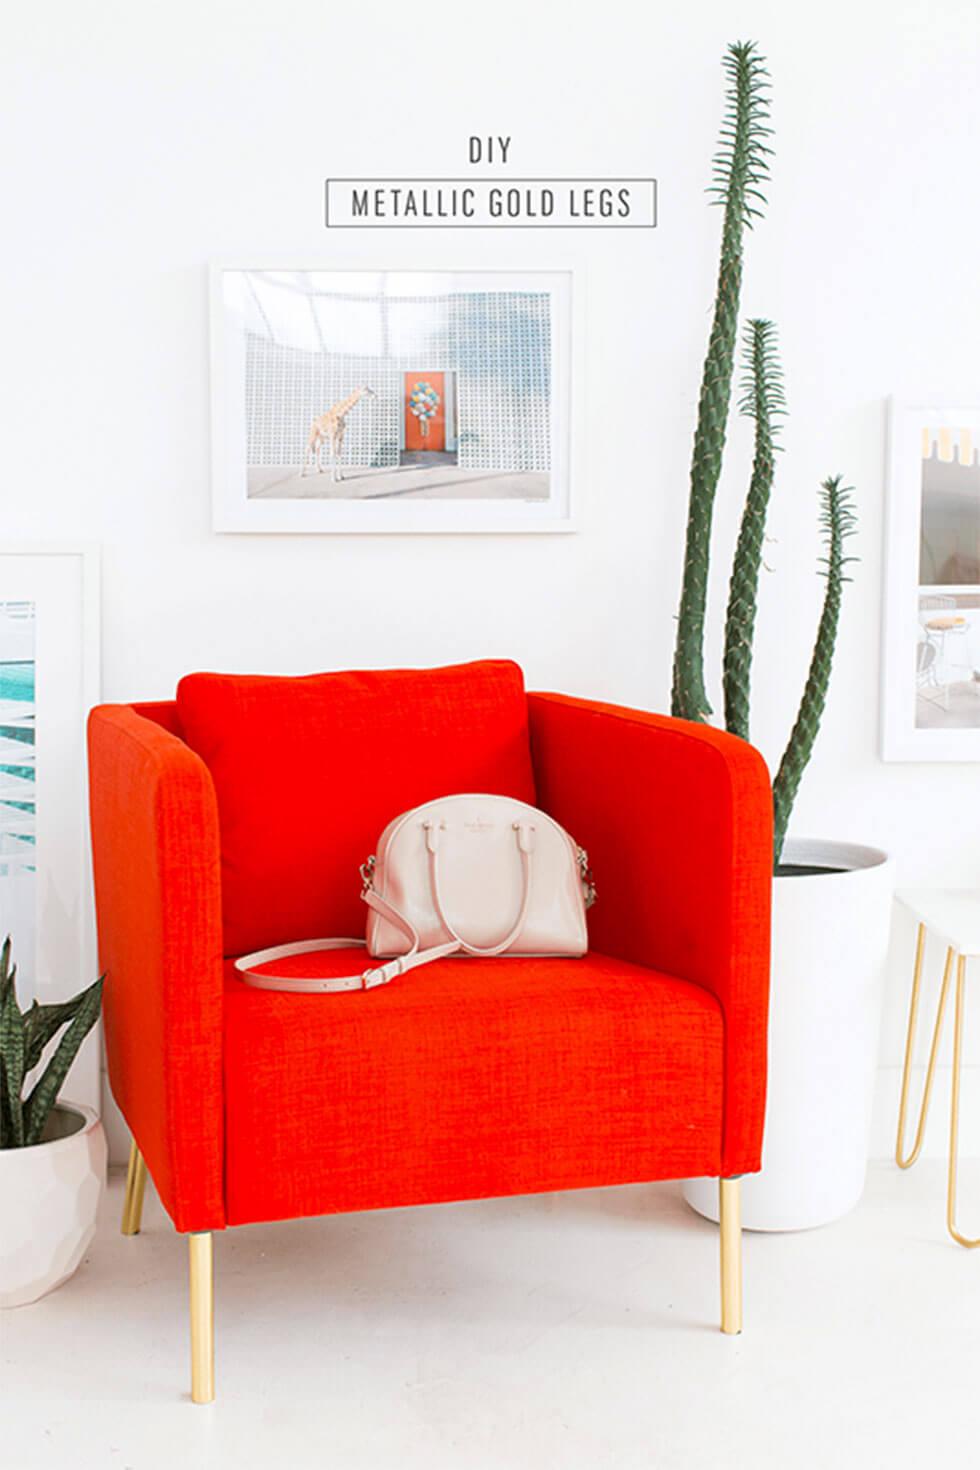 Bright red orange armchair with gold legs in a white room